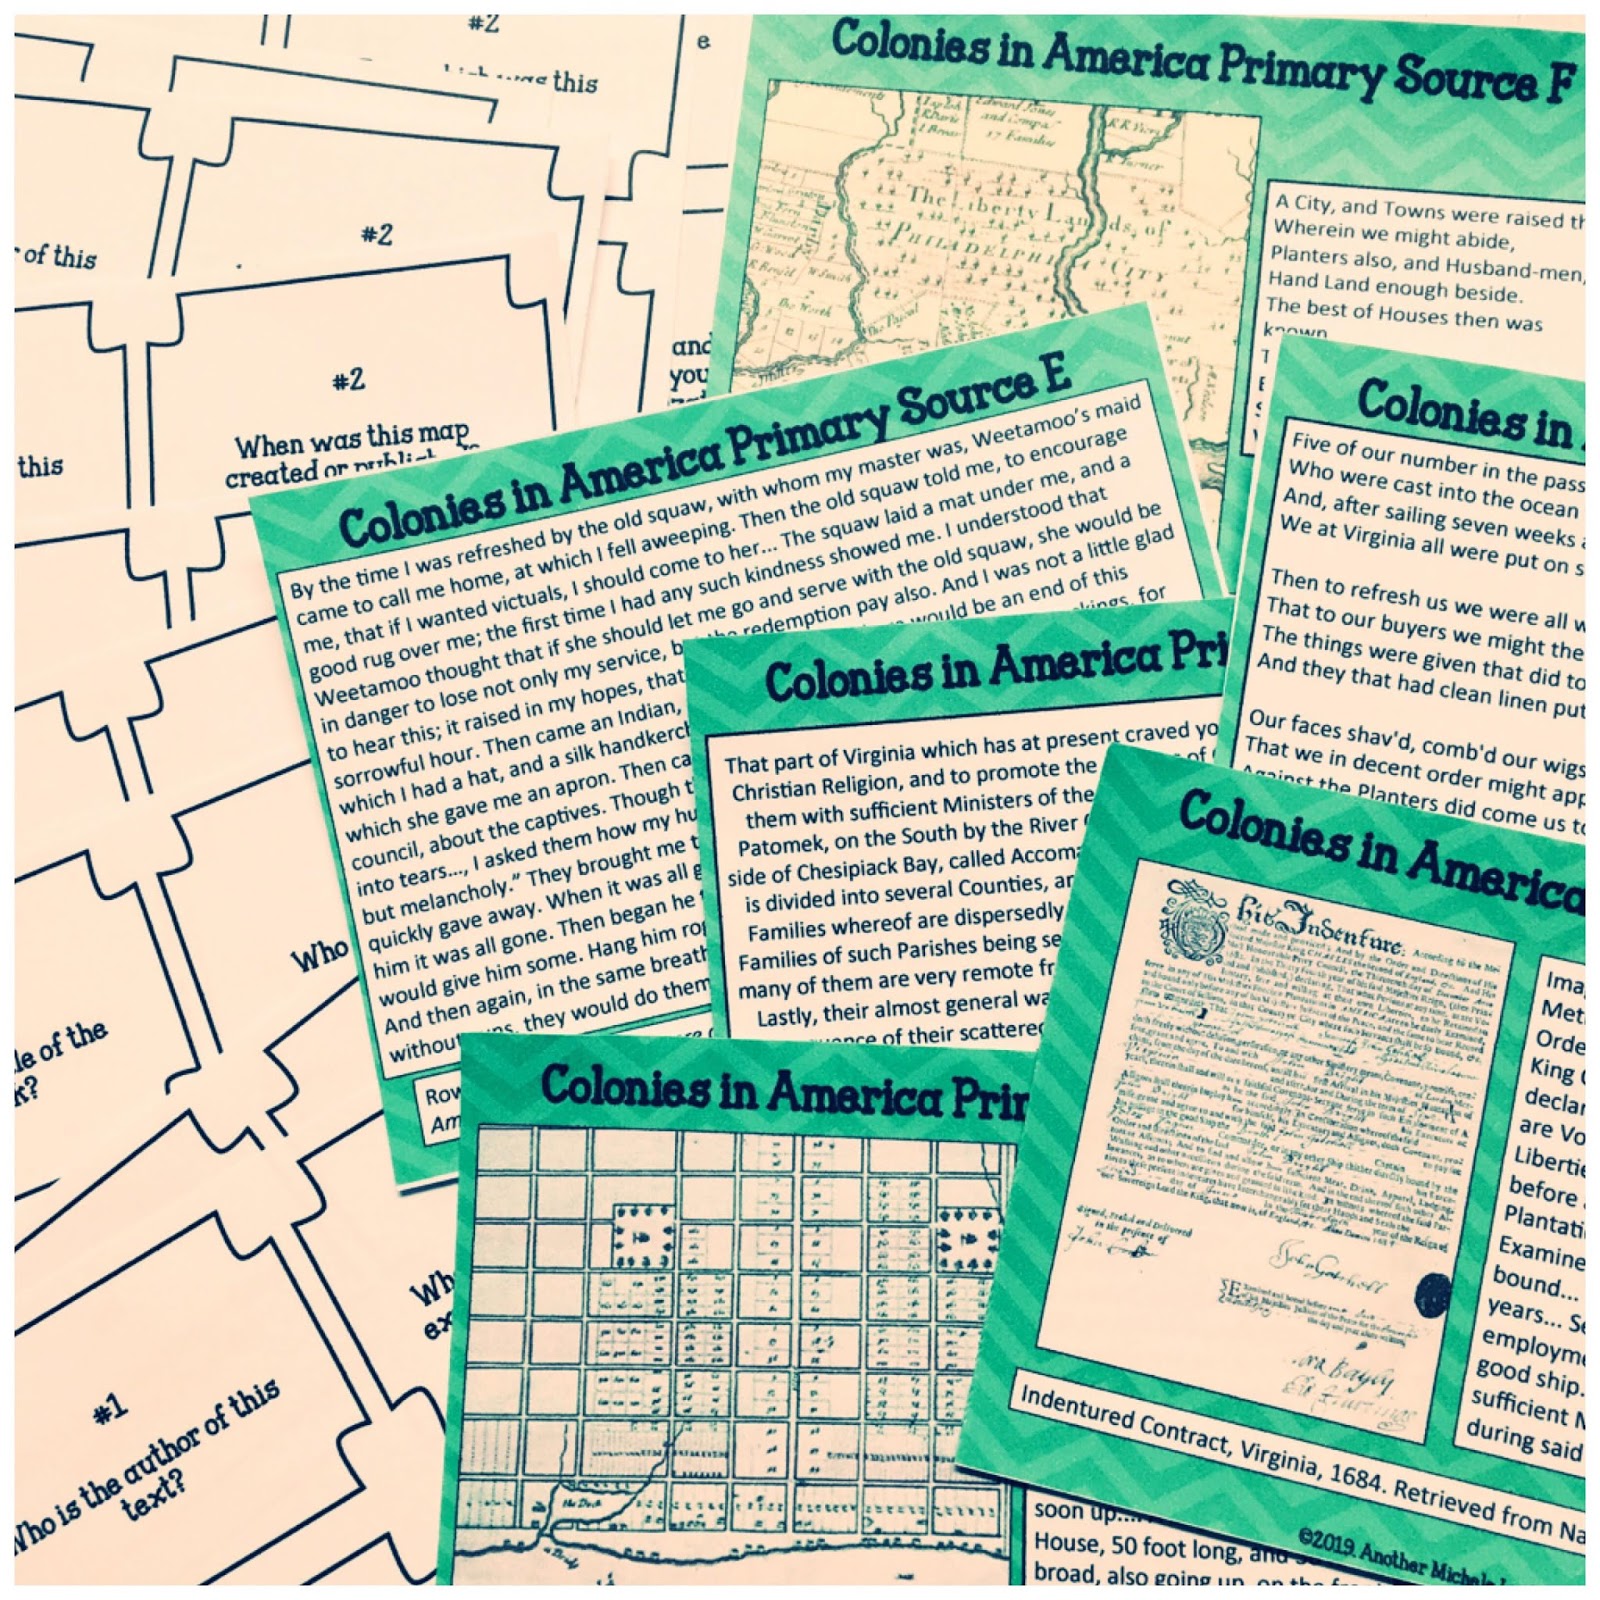 Elementary school teachers, Explore Early America with your students while analyzing primary sources, using task cards to encourage inquiry, and facilitating group collaboration. #elementaryteachers #teachinginquiry #criticalthinking #primarysourceanalysis